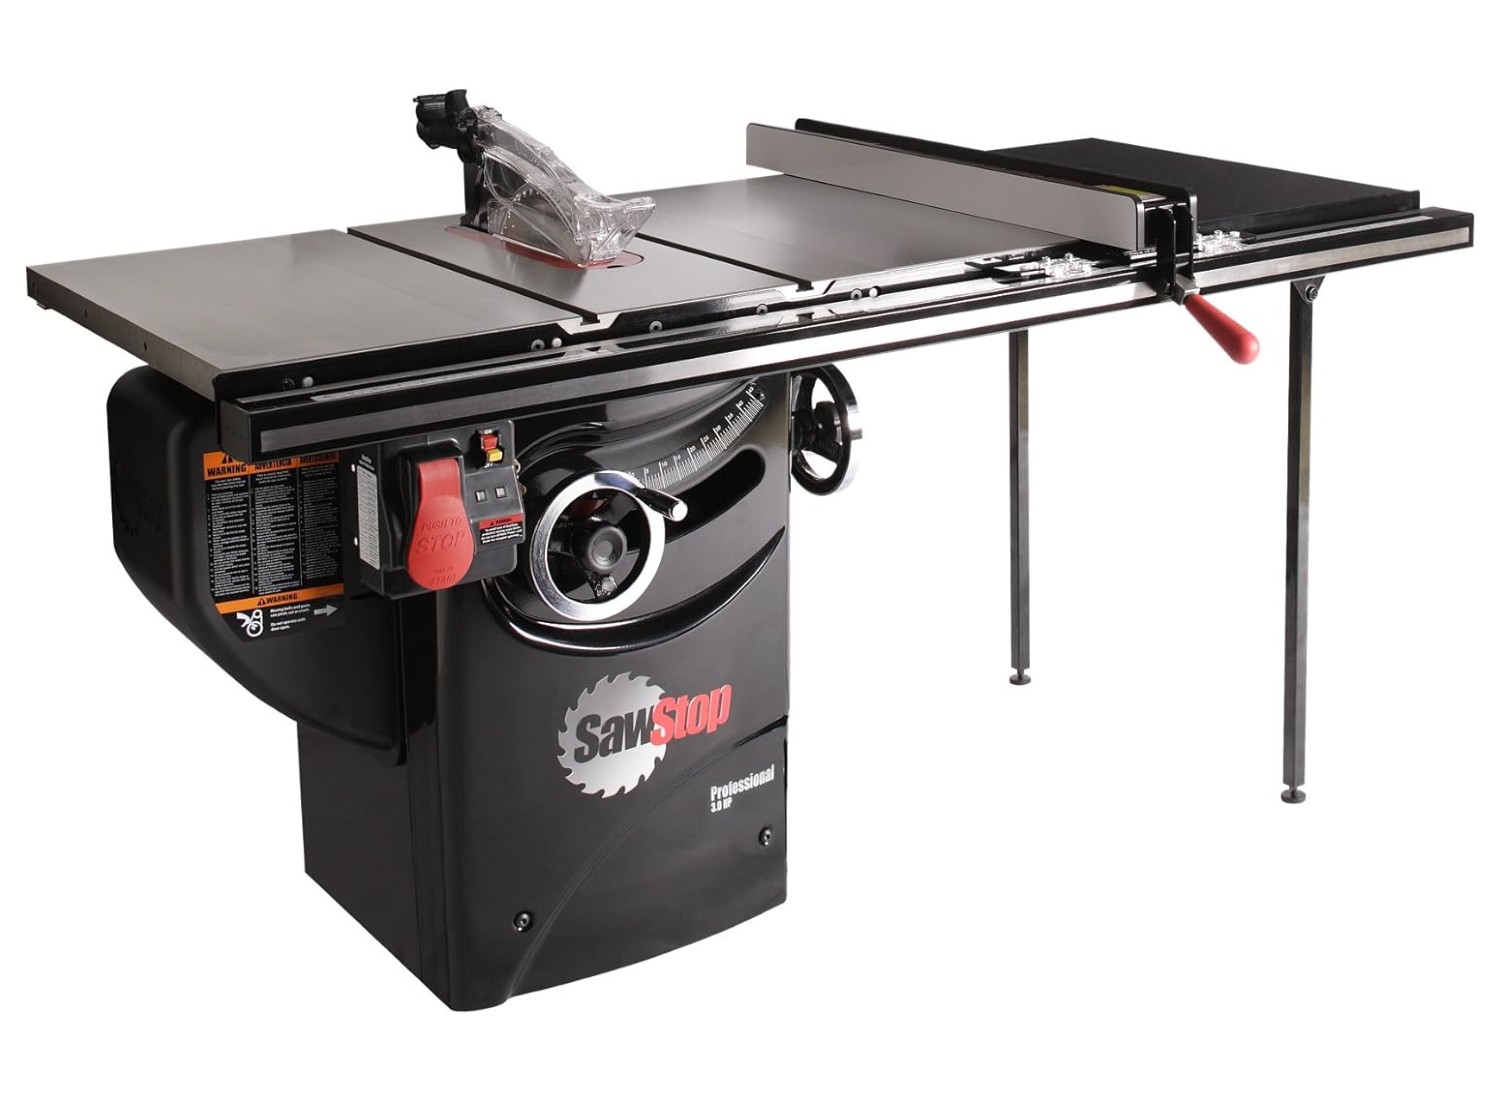 Image of the SawStop cabinet table saw at an angle on a white background.